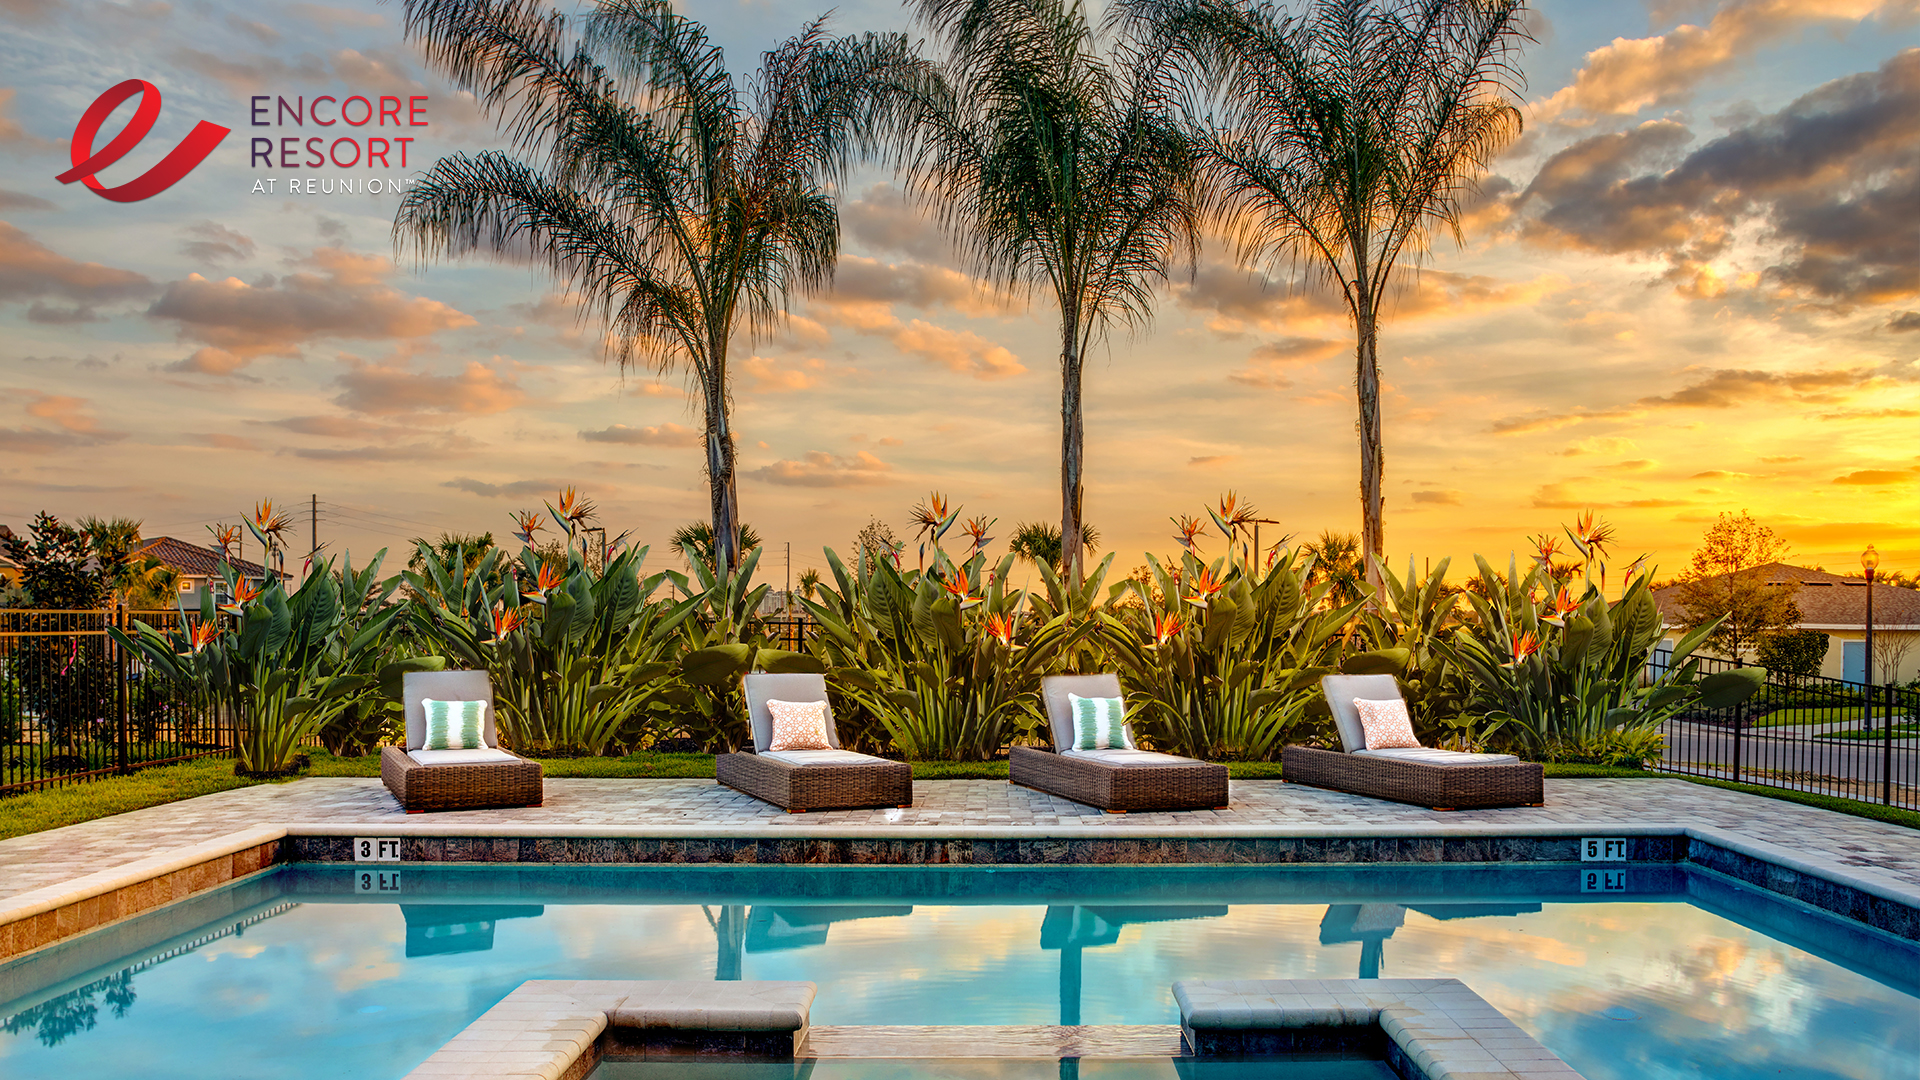 Desktop wallpaper featuring an Encore Resort vacation home private pool at sunset.